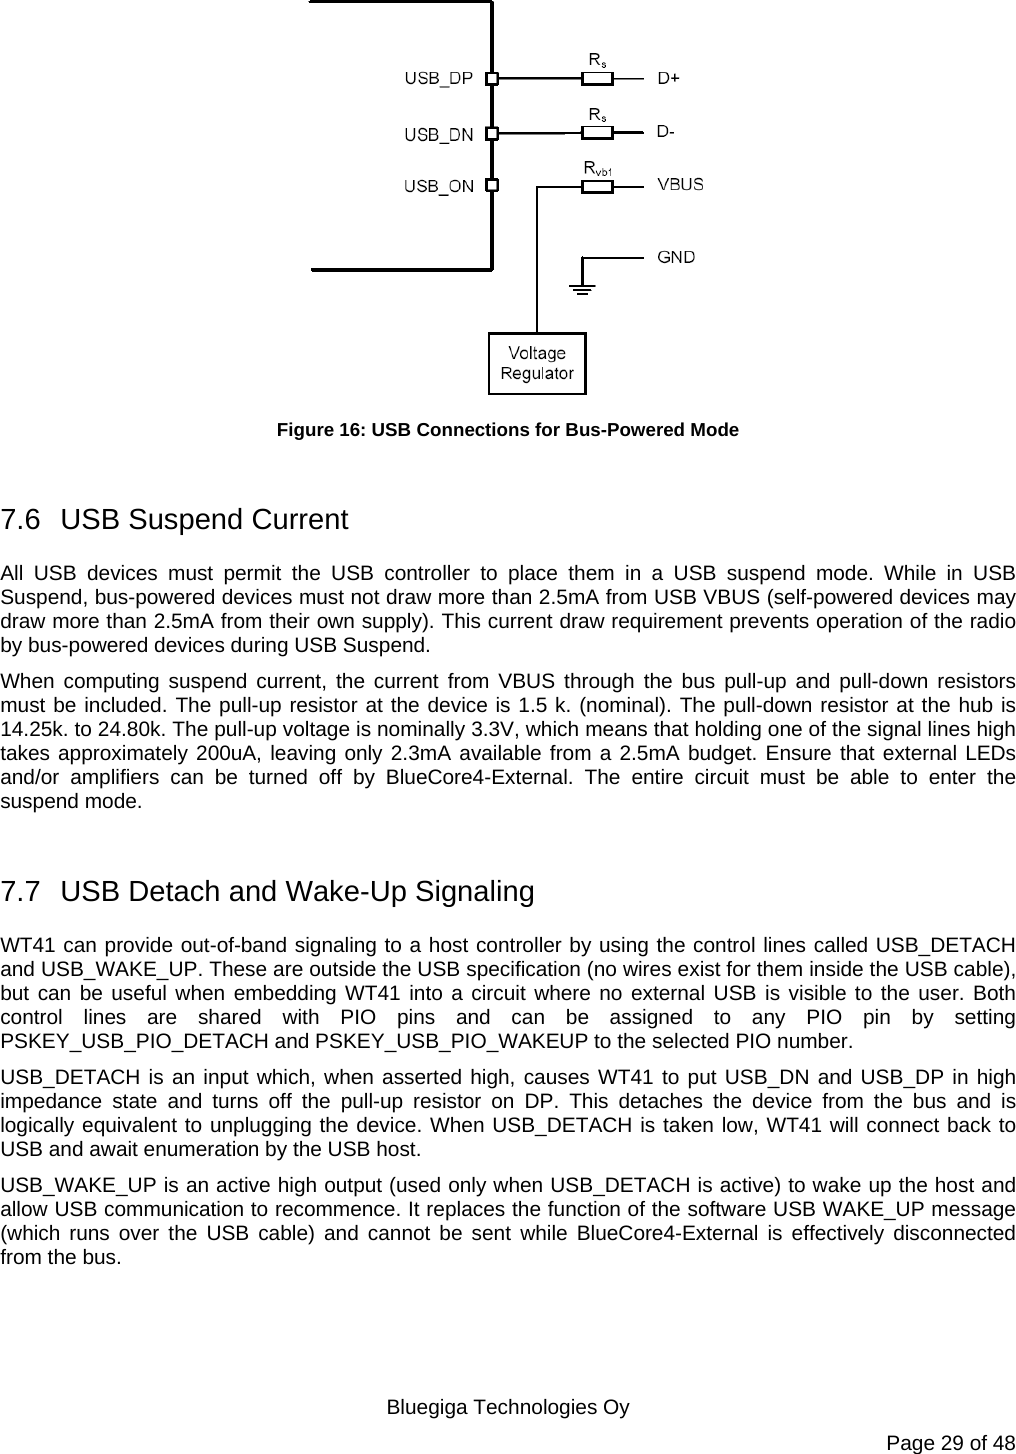   Bluegiga Technologies Oy Page 29 of 48  Figure 16: USB Connections for Bus-Powered Mode  7.6  USB Suspend Current All USB devices must permit the USB controller to place them in a USB suspend mode. While in USB Suspend, bus-powered devices must not draw more than 2.5mA from USB VBUS (self-powered devices may draw more than 2.5mA from their own supply). This current draw requirement prevents operation of the radio by bus-powered devices during USB Suspend. When computing suspend current, the current from VBUS through the bus pull-up and pull-down resistors must be included. The pull-up resistor at the device is 1.5 k. (nominal). The pull-down resistor at the hub is 14.25k. to 24.80k. The pull-up voltage is nominally 3.3V, which means that holding one of the signal lines high takes approximately 200uA, leaving only 2.3mA available from a 2.5mA budget. Ensure that external LEDs and/or amplifiers can be turned off by BlueCore4-External. The entire circuit must be able to enter the suspend mode.  7.7  USB Detach and Wake-Up Signaling WT41 can provide out-of-band signaling to a host controller by using the control lines called USB_DETACH and USB_WAKE_UP. These are outside the USB specification (no wires exist for them inside the USB cable), but can be useful when embedding WT41 into a circuit where no external USB is visible to the user. Both control lines are shared with PIO pins and can be assigned to any PIO pin by setting PSKEY_USB_PIO_DETACH and PSKEY_USB_PIO_WAKEUP to the selected PIO number. USB_DETACH is an input which, when asserted high, causes WT41 to put USB_DN and USB_DP in high impedance state and turns off the pull-up resistor on DP. This detaches the device from the bus and is logically equivalent to unplugging the device. When USB_DETACH is taken low, WT41 will connect back to USB and await enumeration by the USB host. USB_WAKE_UP is an active high output (used only when USB_DETACH is active) to wake up the host and allow USB communication to recommence. It replaces the function of the software USB WAKE_UP message (which runs over the USB cable) and cannot be sent while BlueCore4-External is effectively disconnected from the bus. 